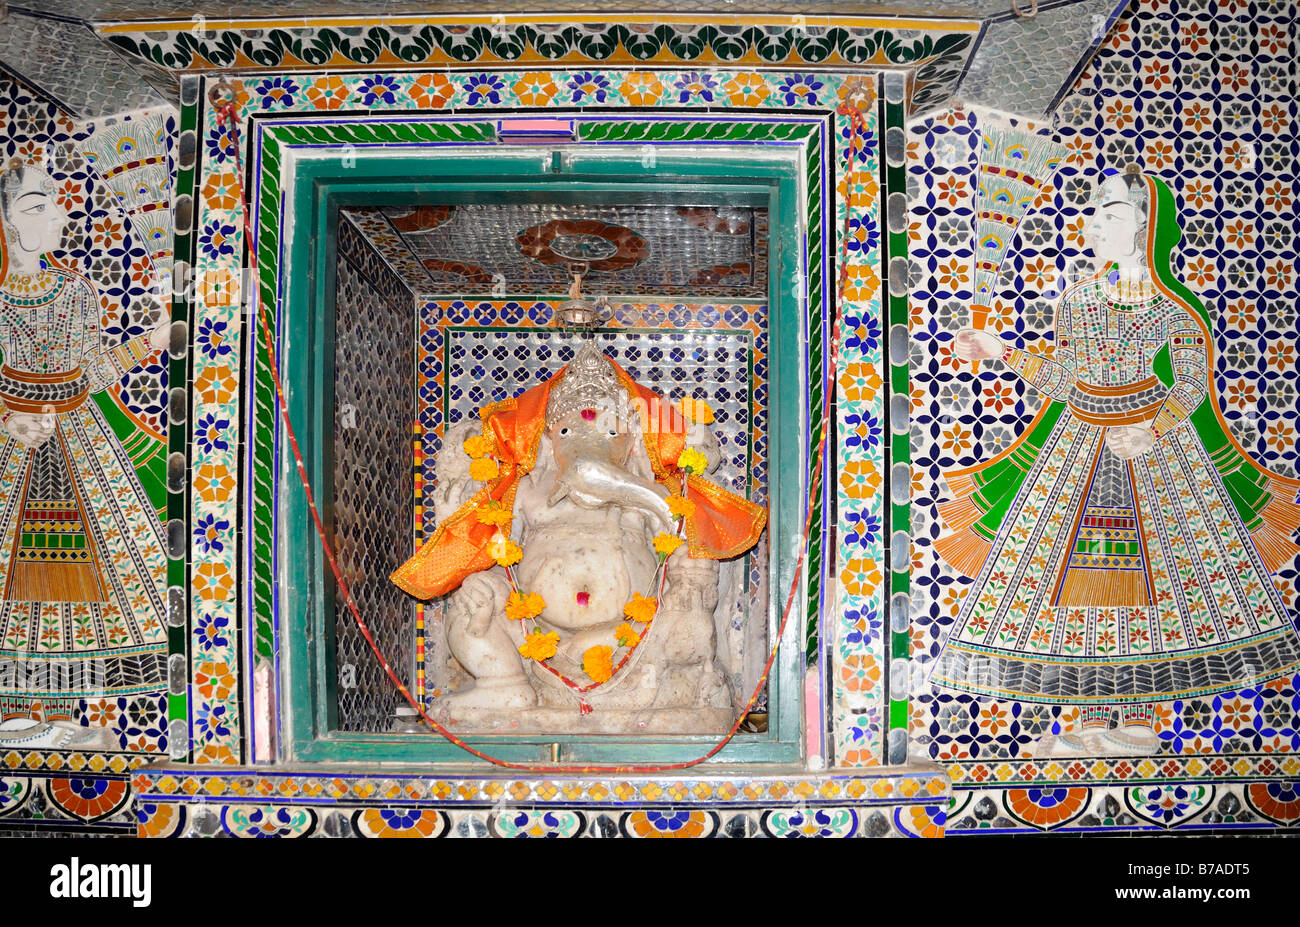 Shrine to Ganesh in the form of a small tiled niche with a statue of Ganesh inside. Stock Photo